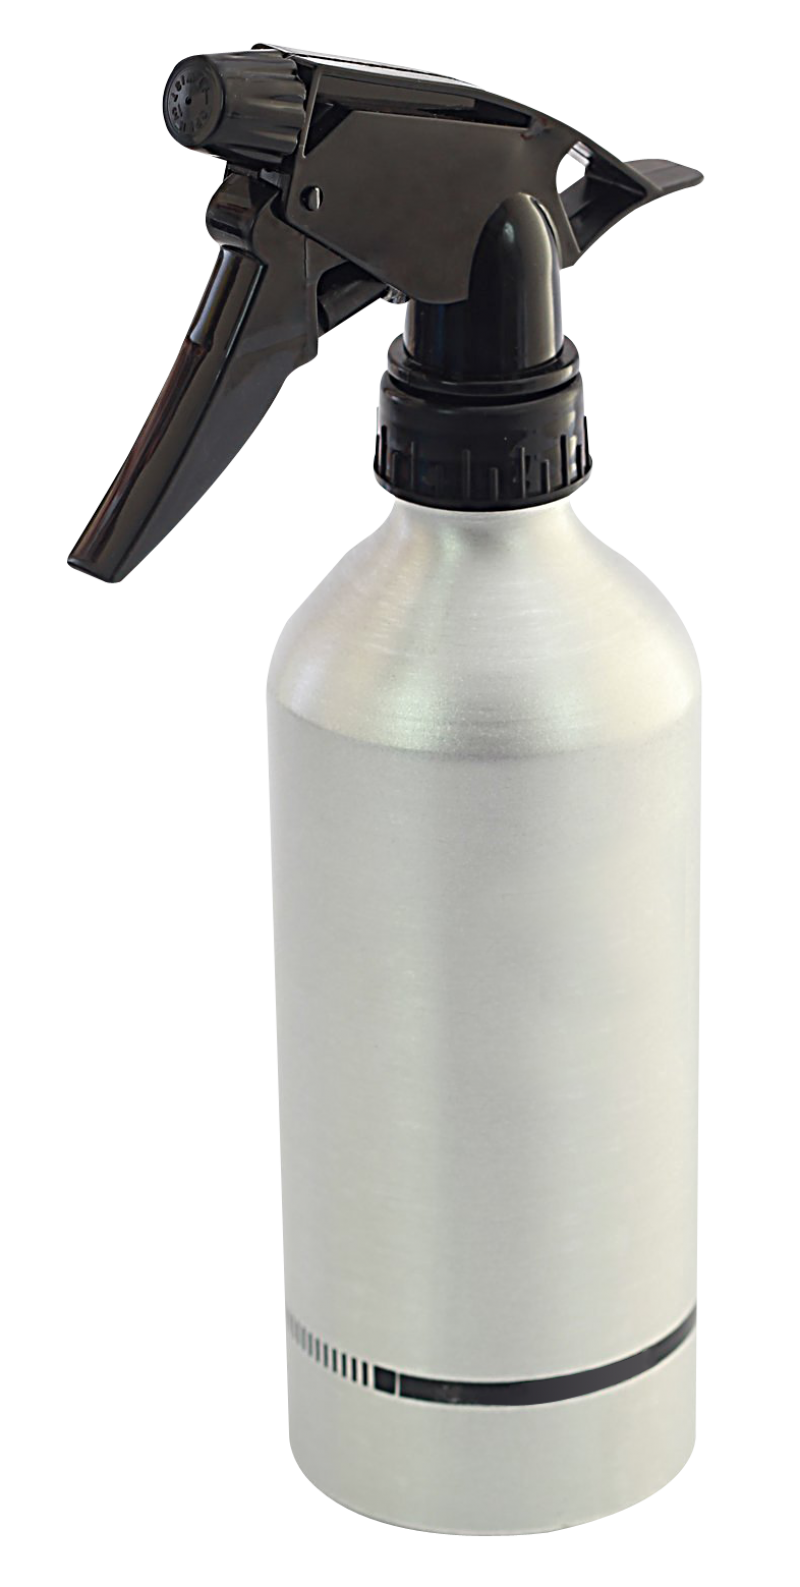 Spray Bottle PNG Image - PurePNG | Free transparent CC0 PNG Image Library